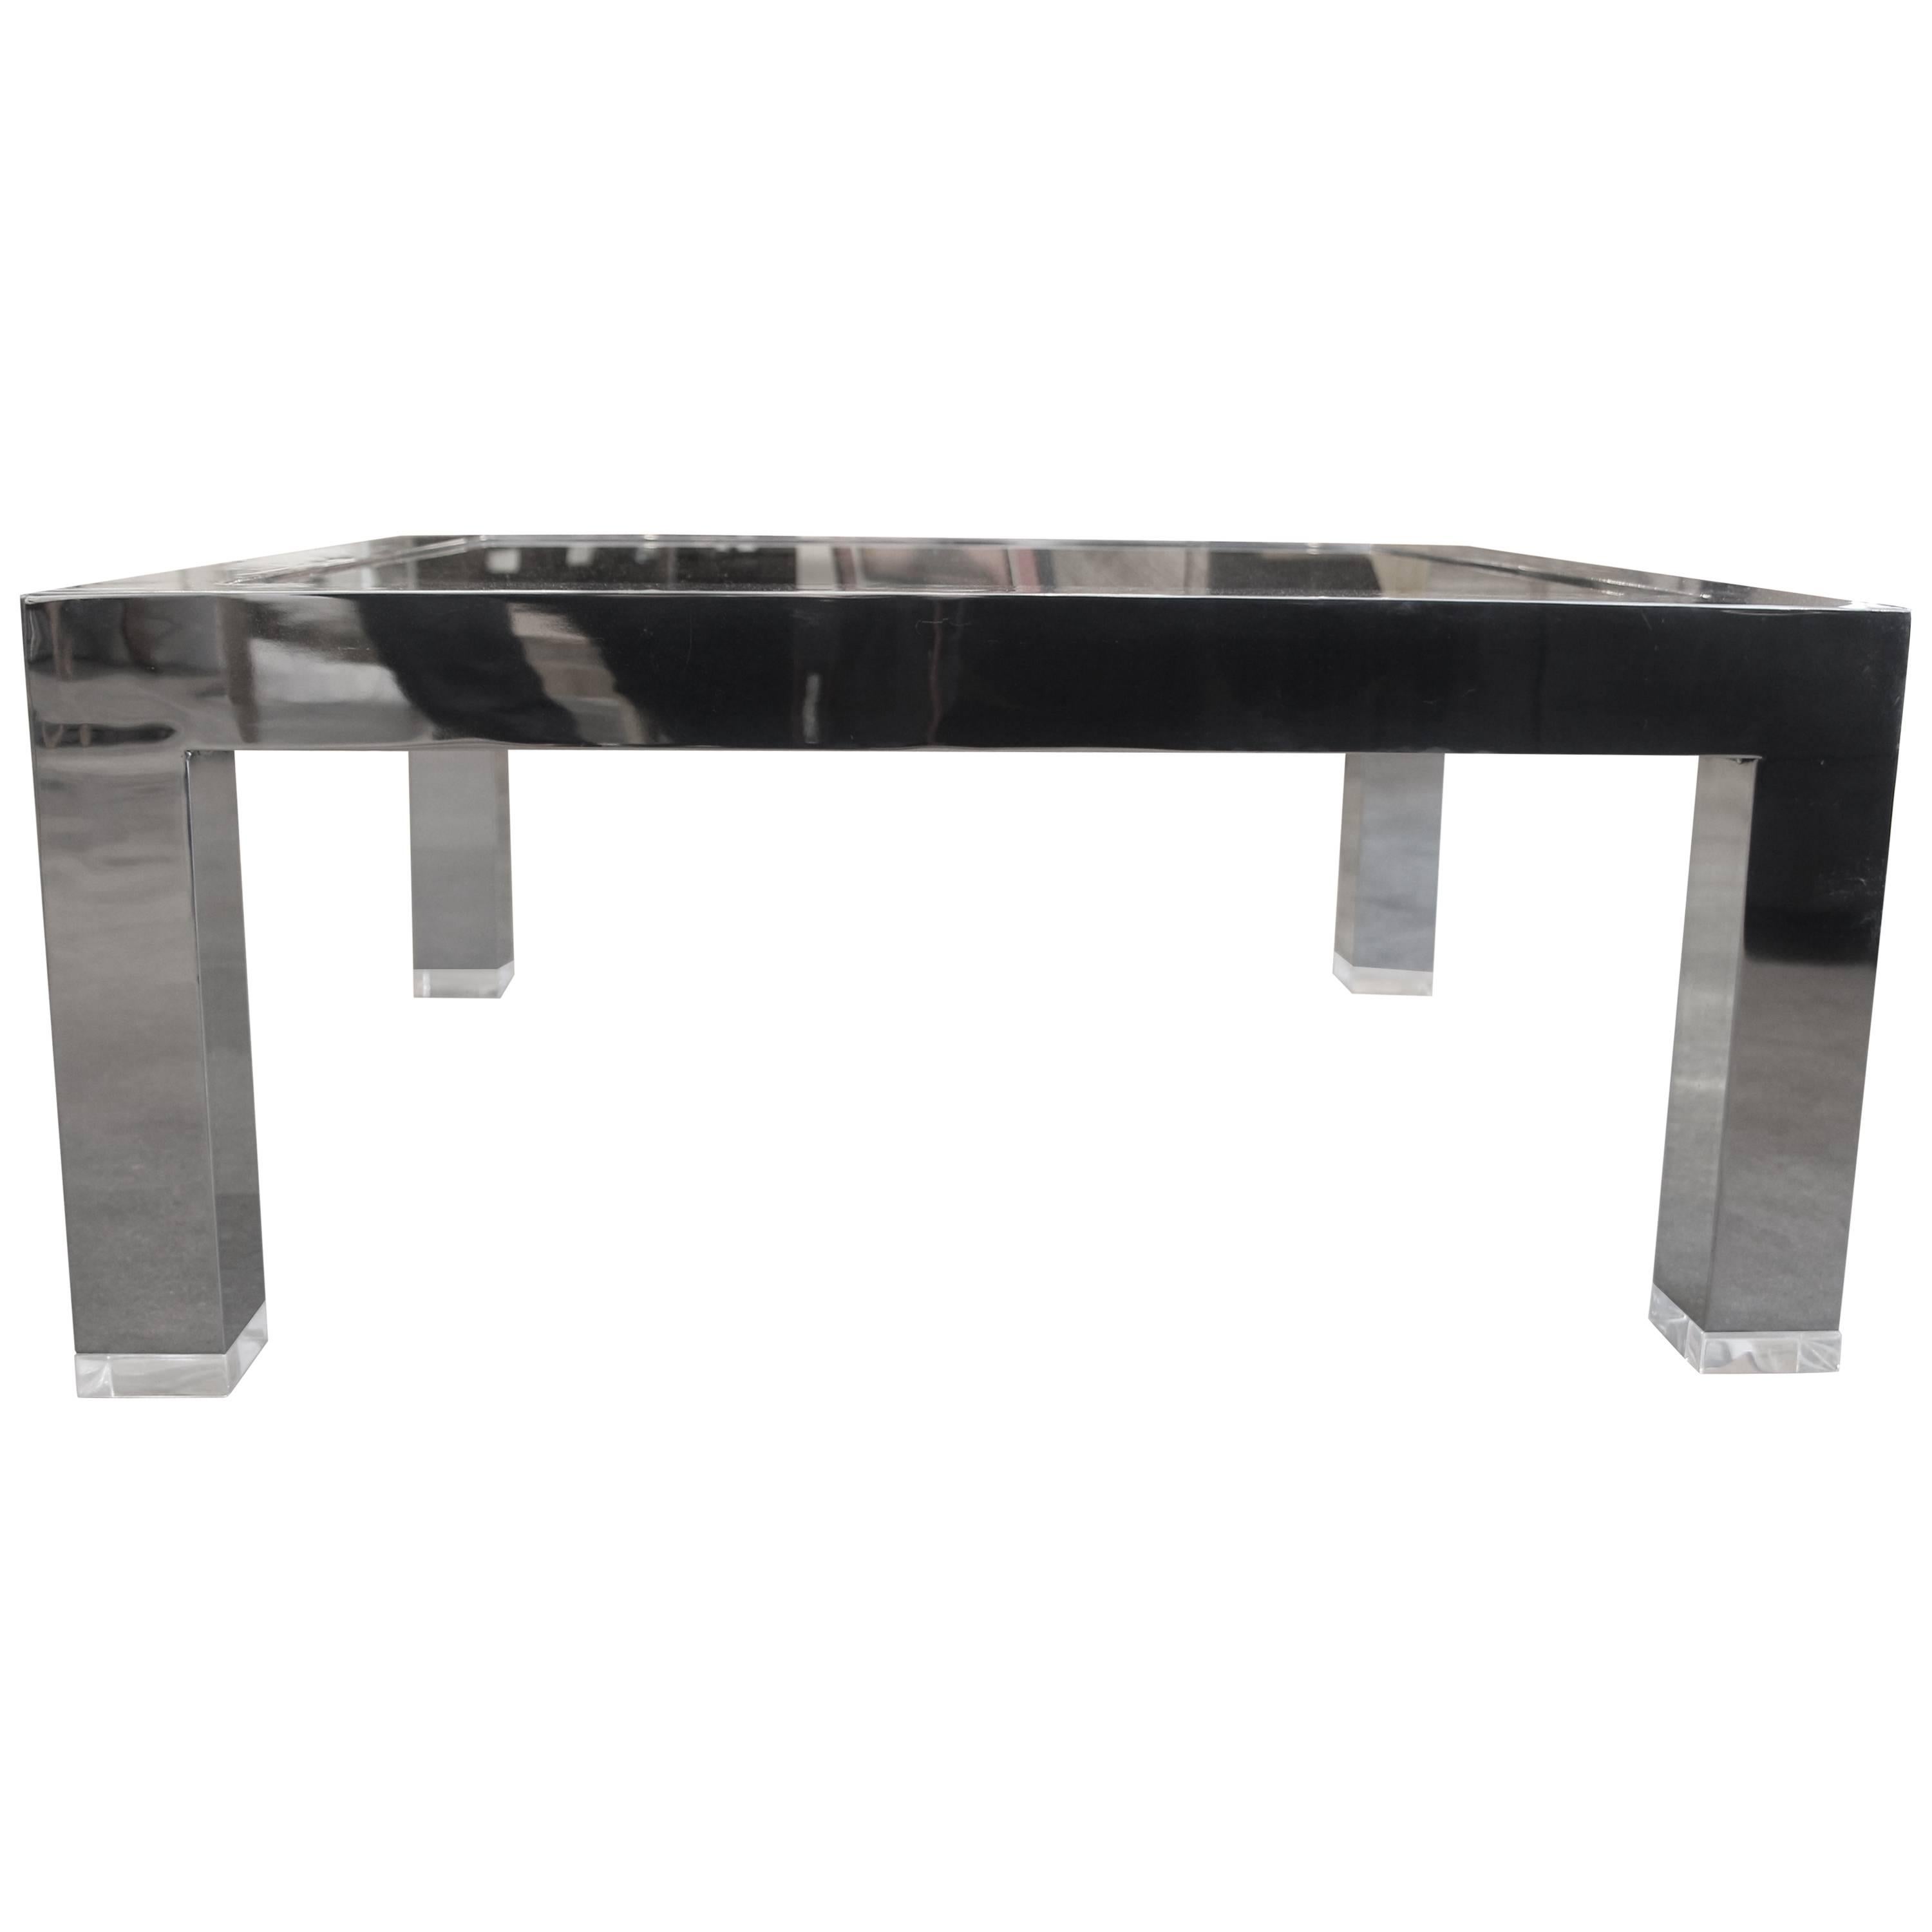 Mirror Polished Aluminium Cocktail Table with Glass Insert